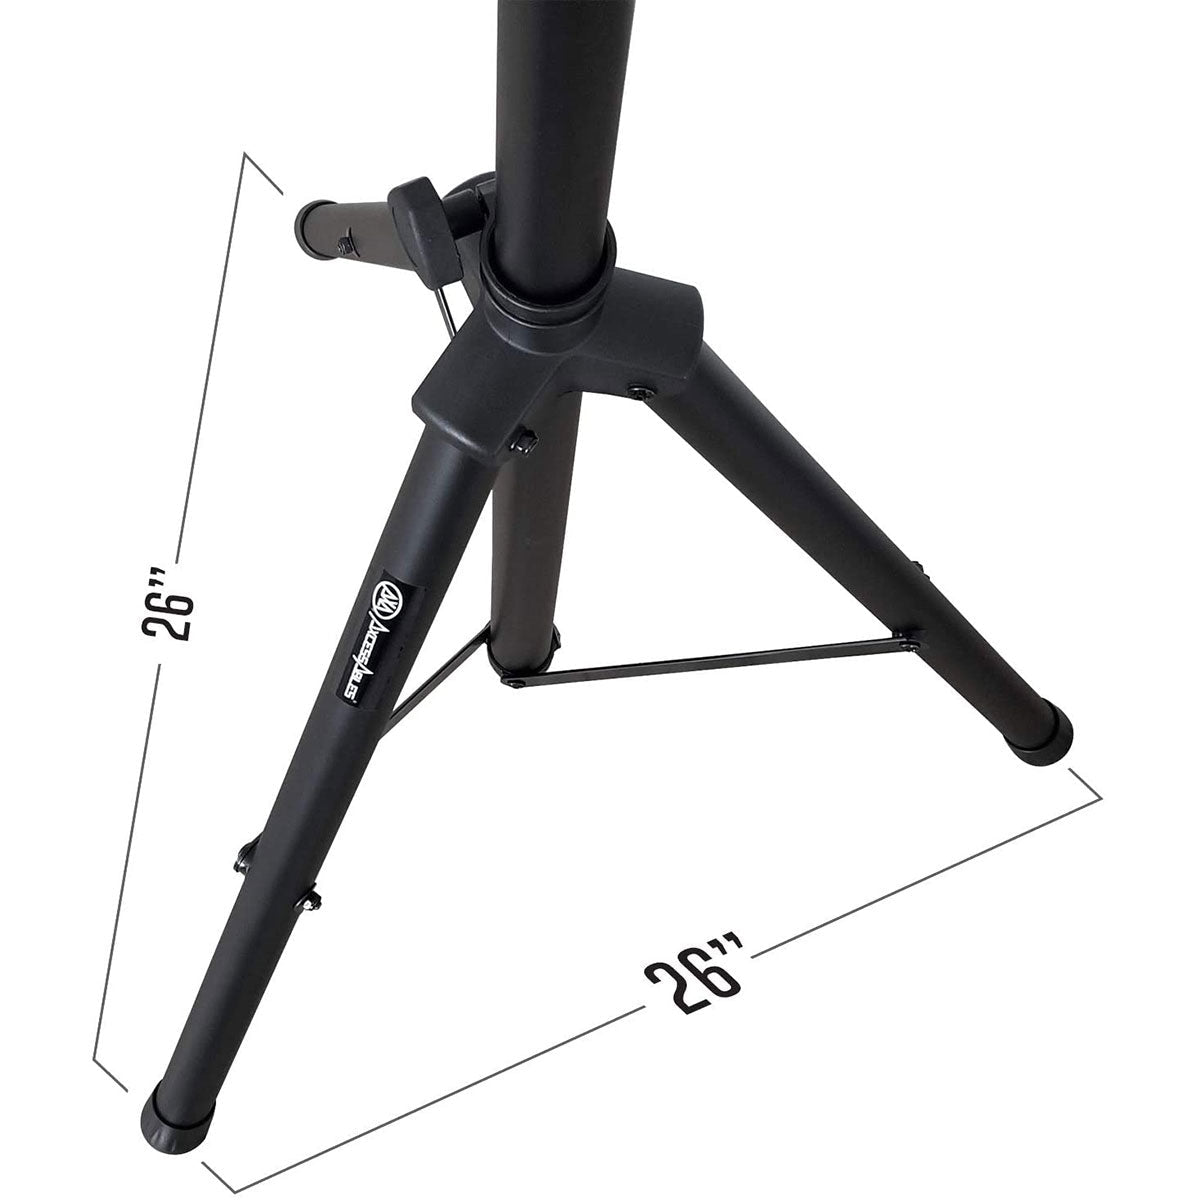 AxcessAbles Heavy-Duty DJ Tripod Stands (Pair) with Bag | Adjustable Height 42-inch to 72-inch PA Speaker Stands| 15lb Portable PA Stands Compatible with Powered Speakers (SSB-101) - Open Box